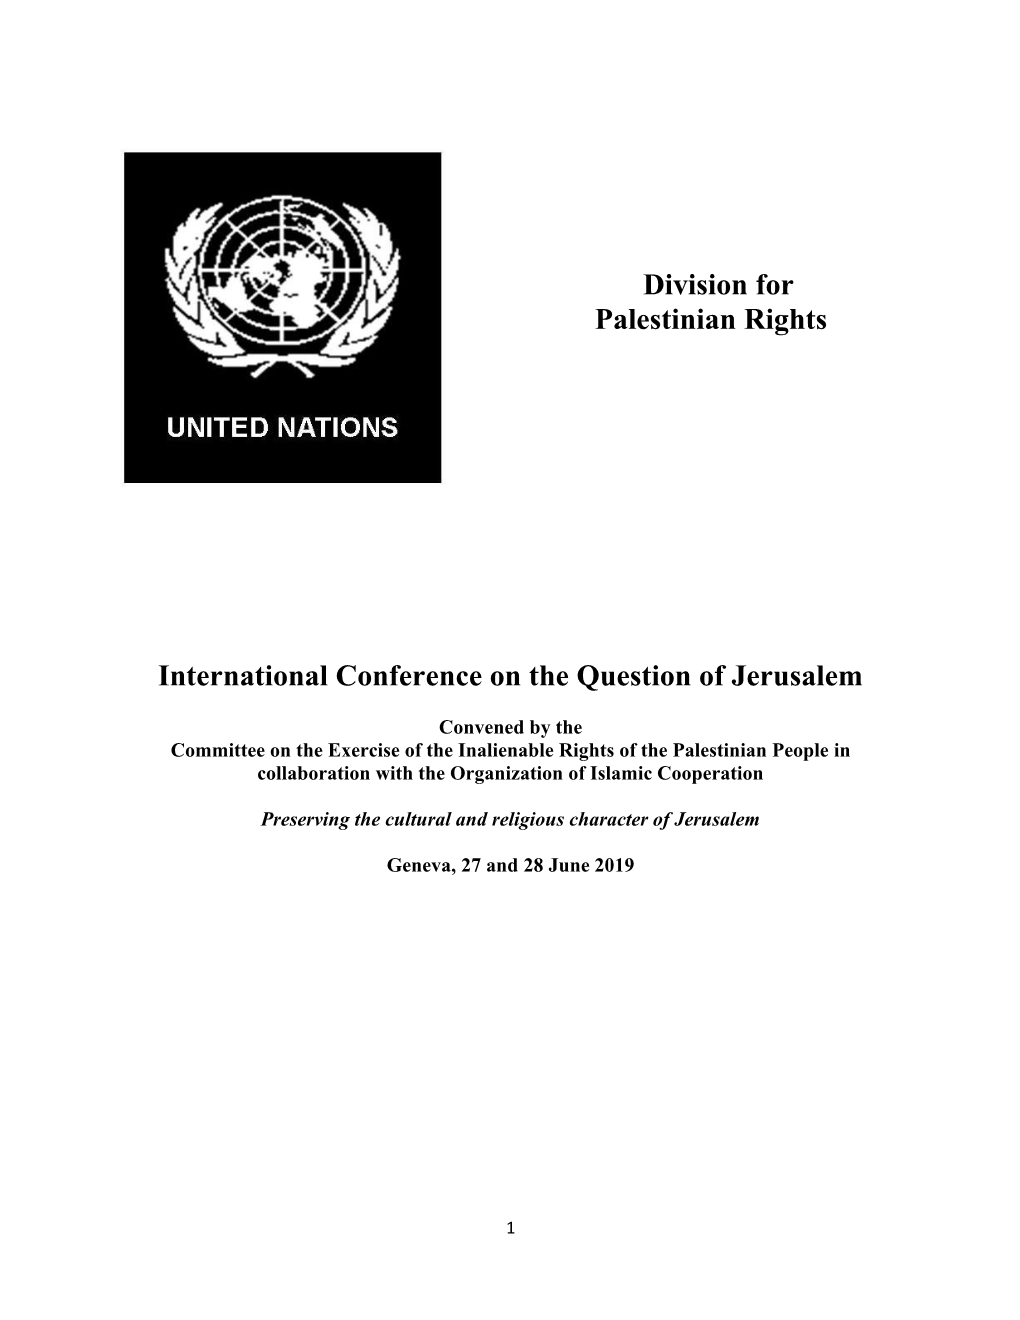 Division for Palestinian Rights International Conference on The